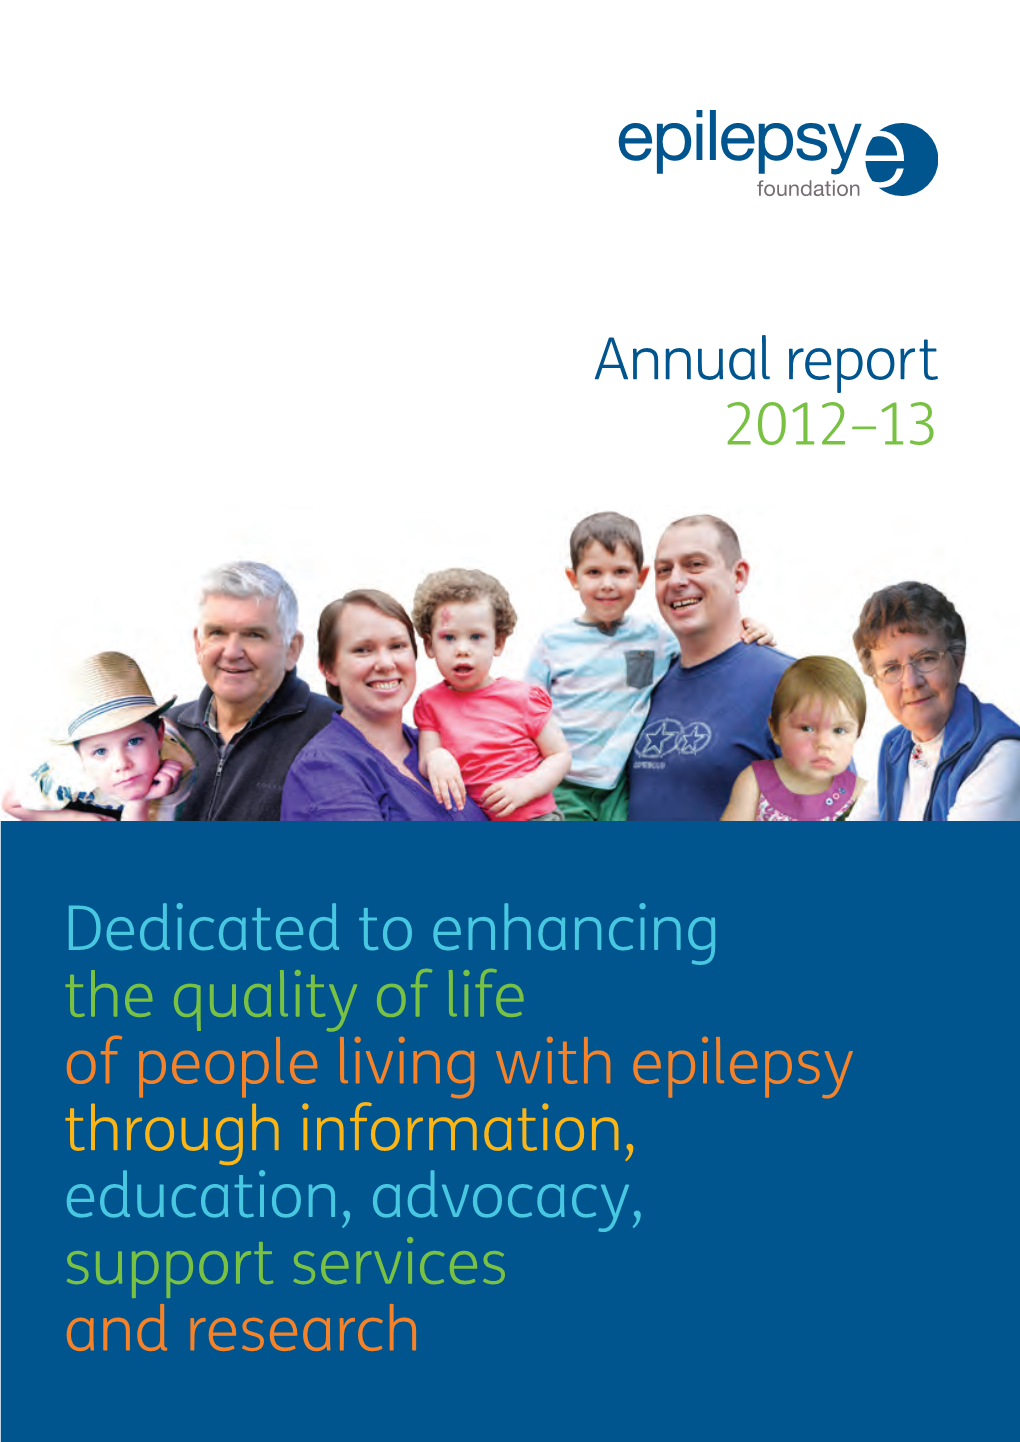 Dedicated to Enhancing the Quality of Life of People Living with Epilepsy